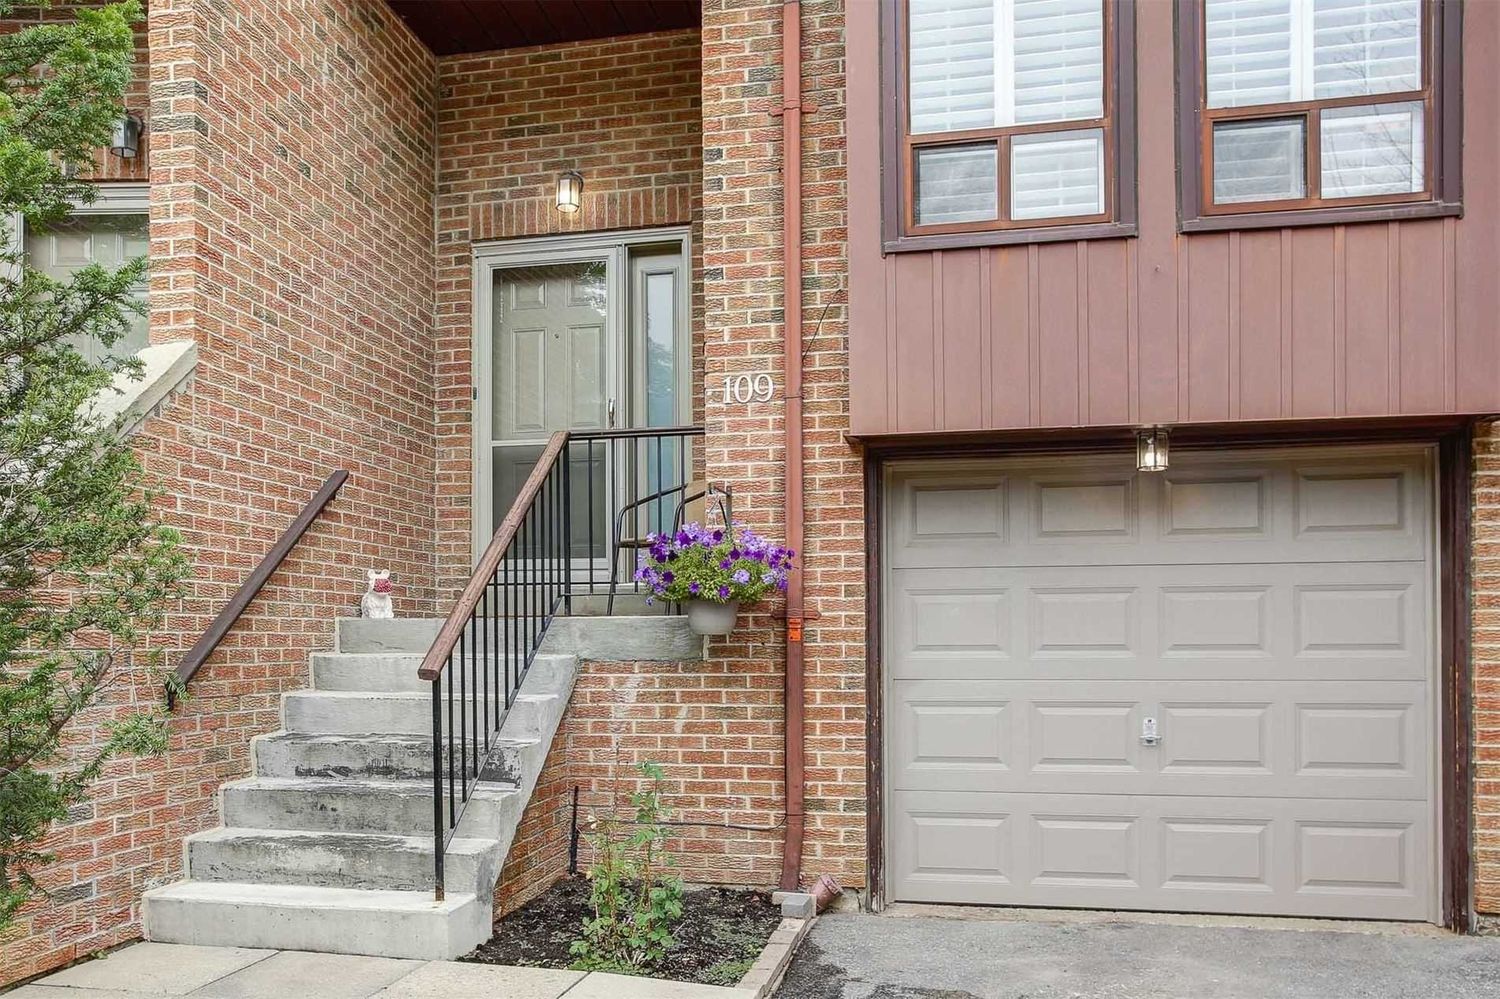 1-130 Wagon Trailway. 1 Wagon Trailway Townhouses is located in  North York, Toronto - image #2 of 2